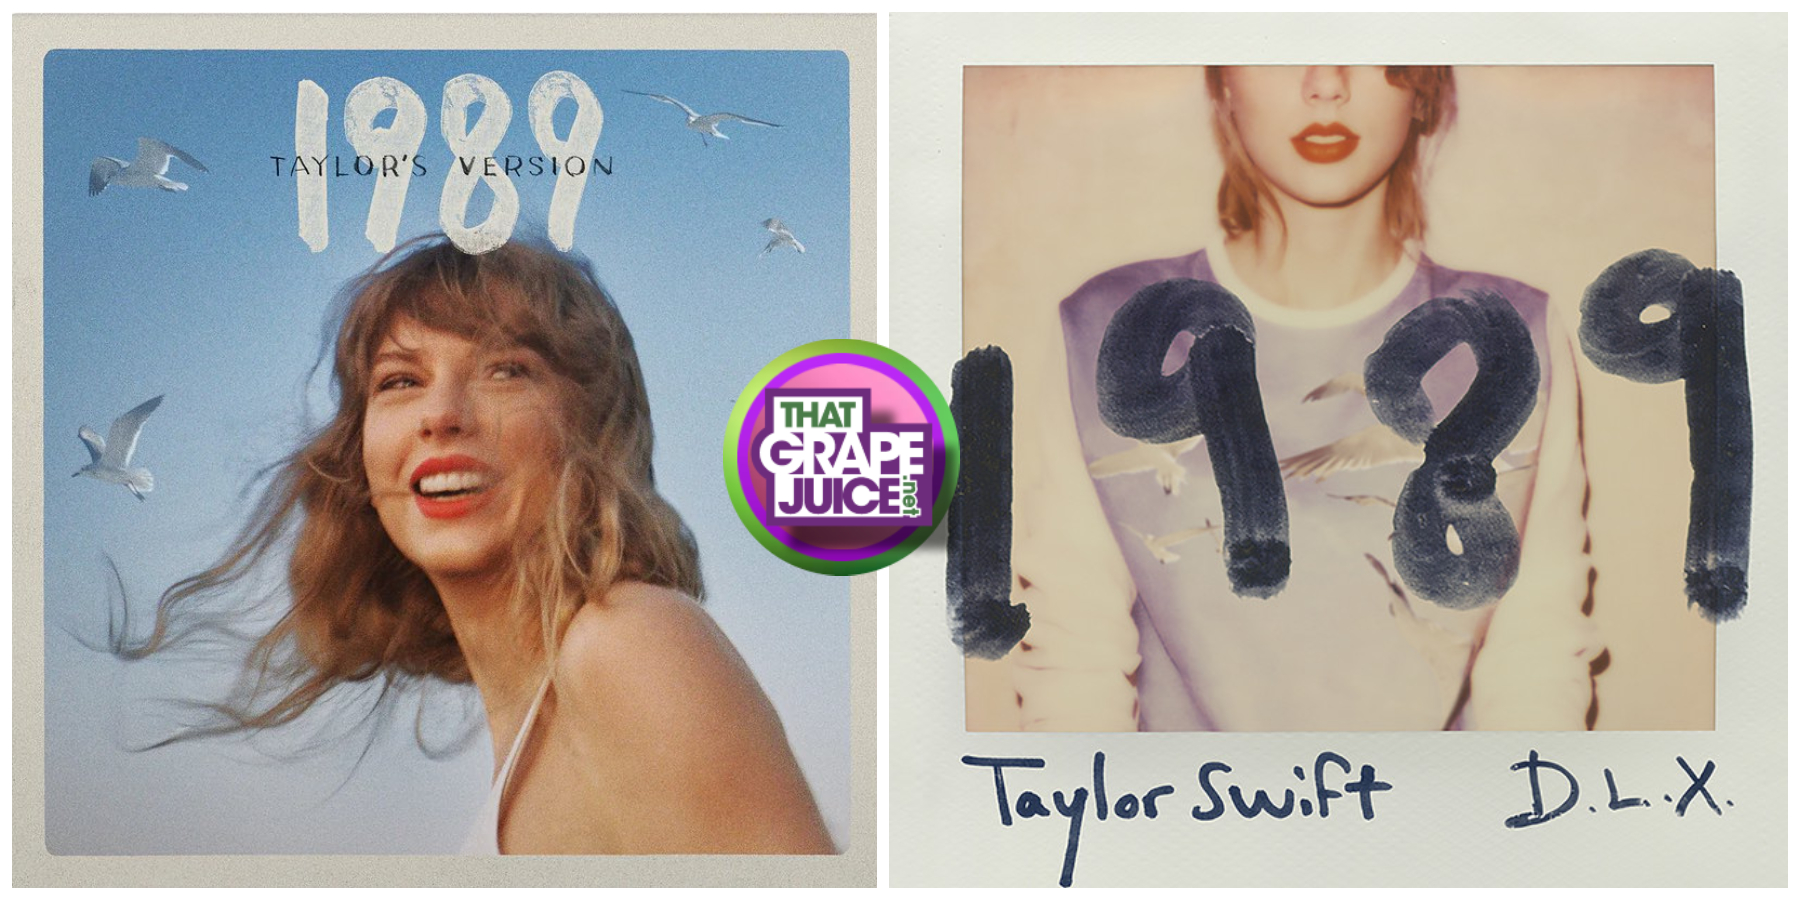 Surprise! Taylor Swift Confirms ‘1989’ Is Her Next Album Re-Record / Drops Official Cover